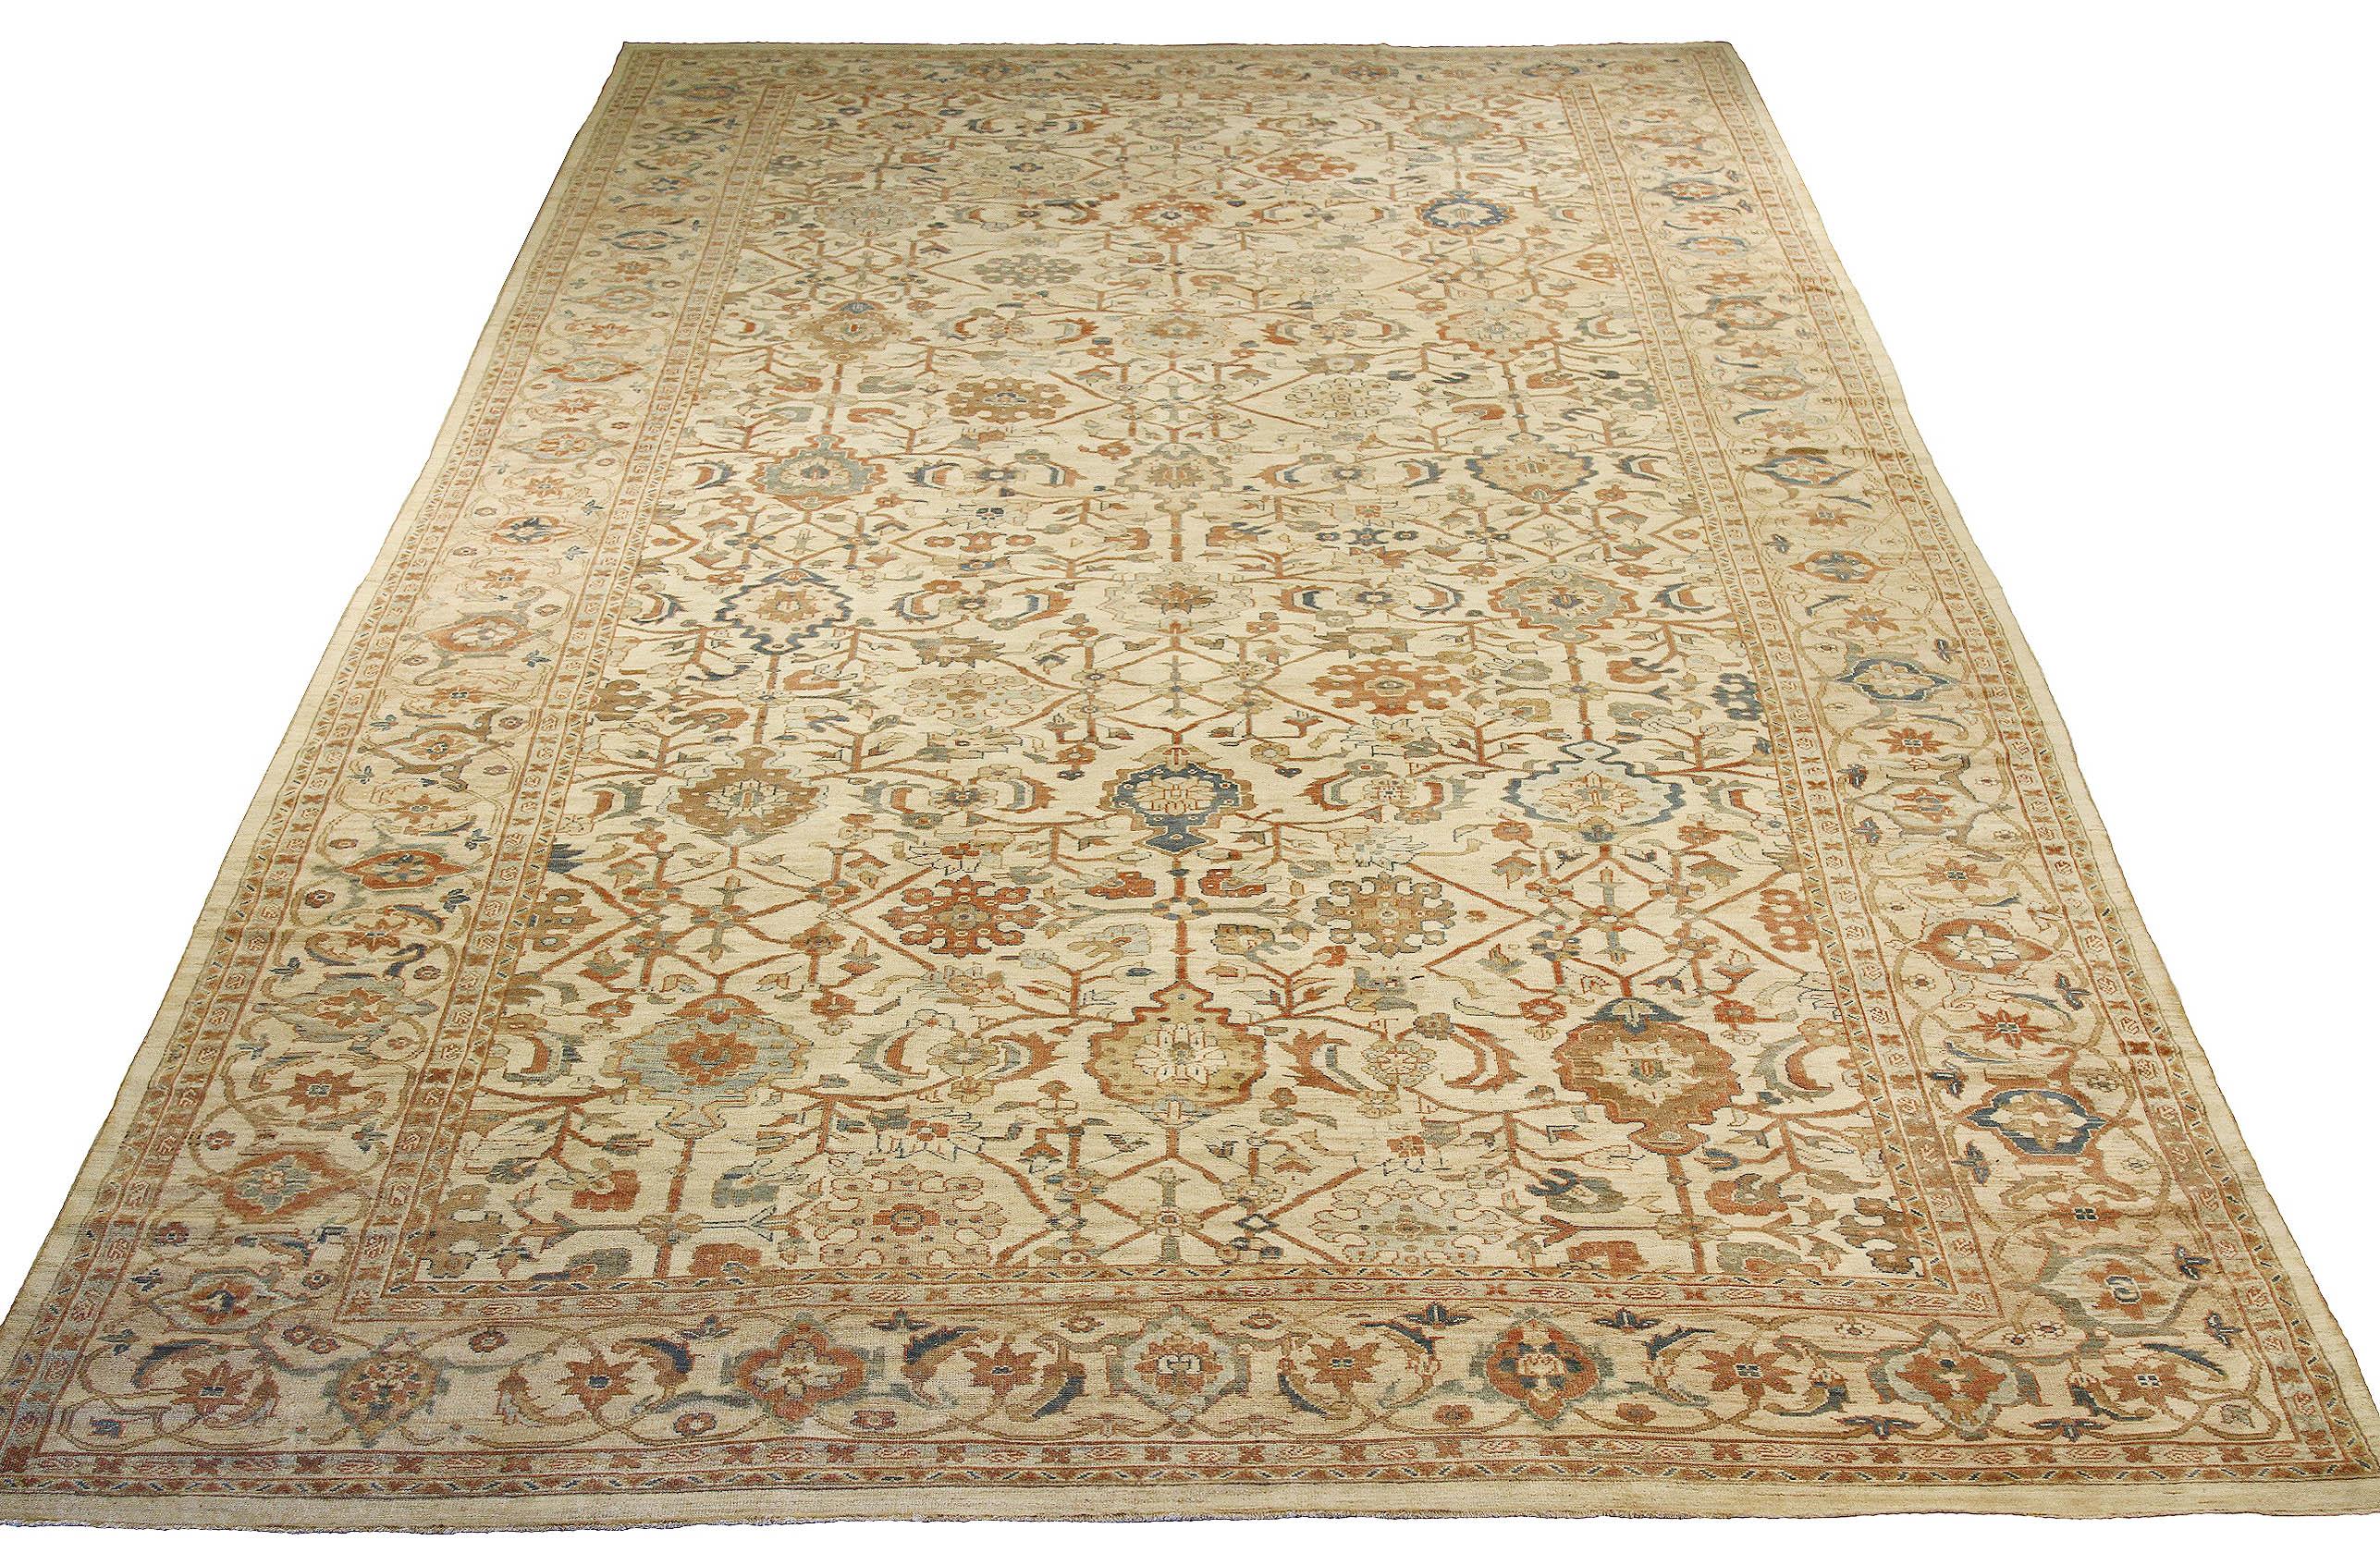 Oversized handmade Persian area rug from high-quality sheep’s wool and colored with eco-friendly vegetable dyes that are proven safe for humans and pets alike. It’s a classic Sultanabad design showcasing a regal ivory field with prominent Herati